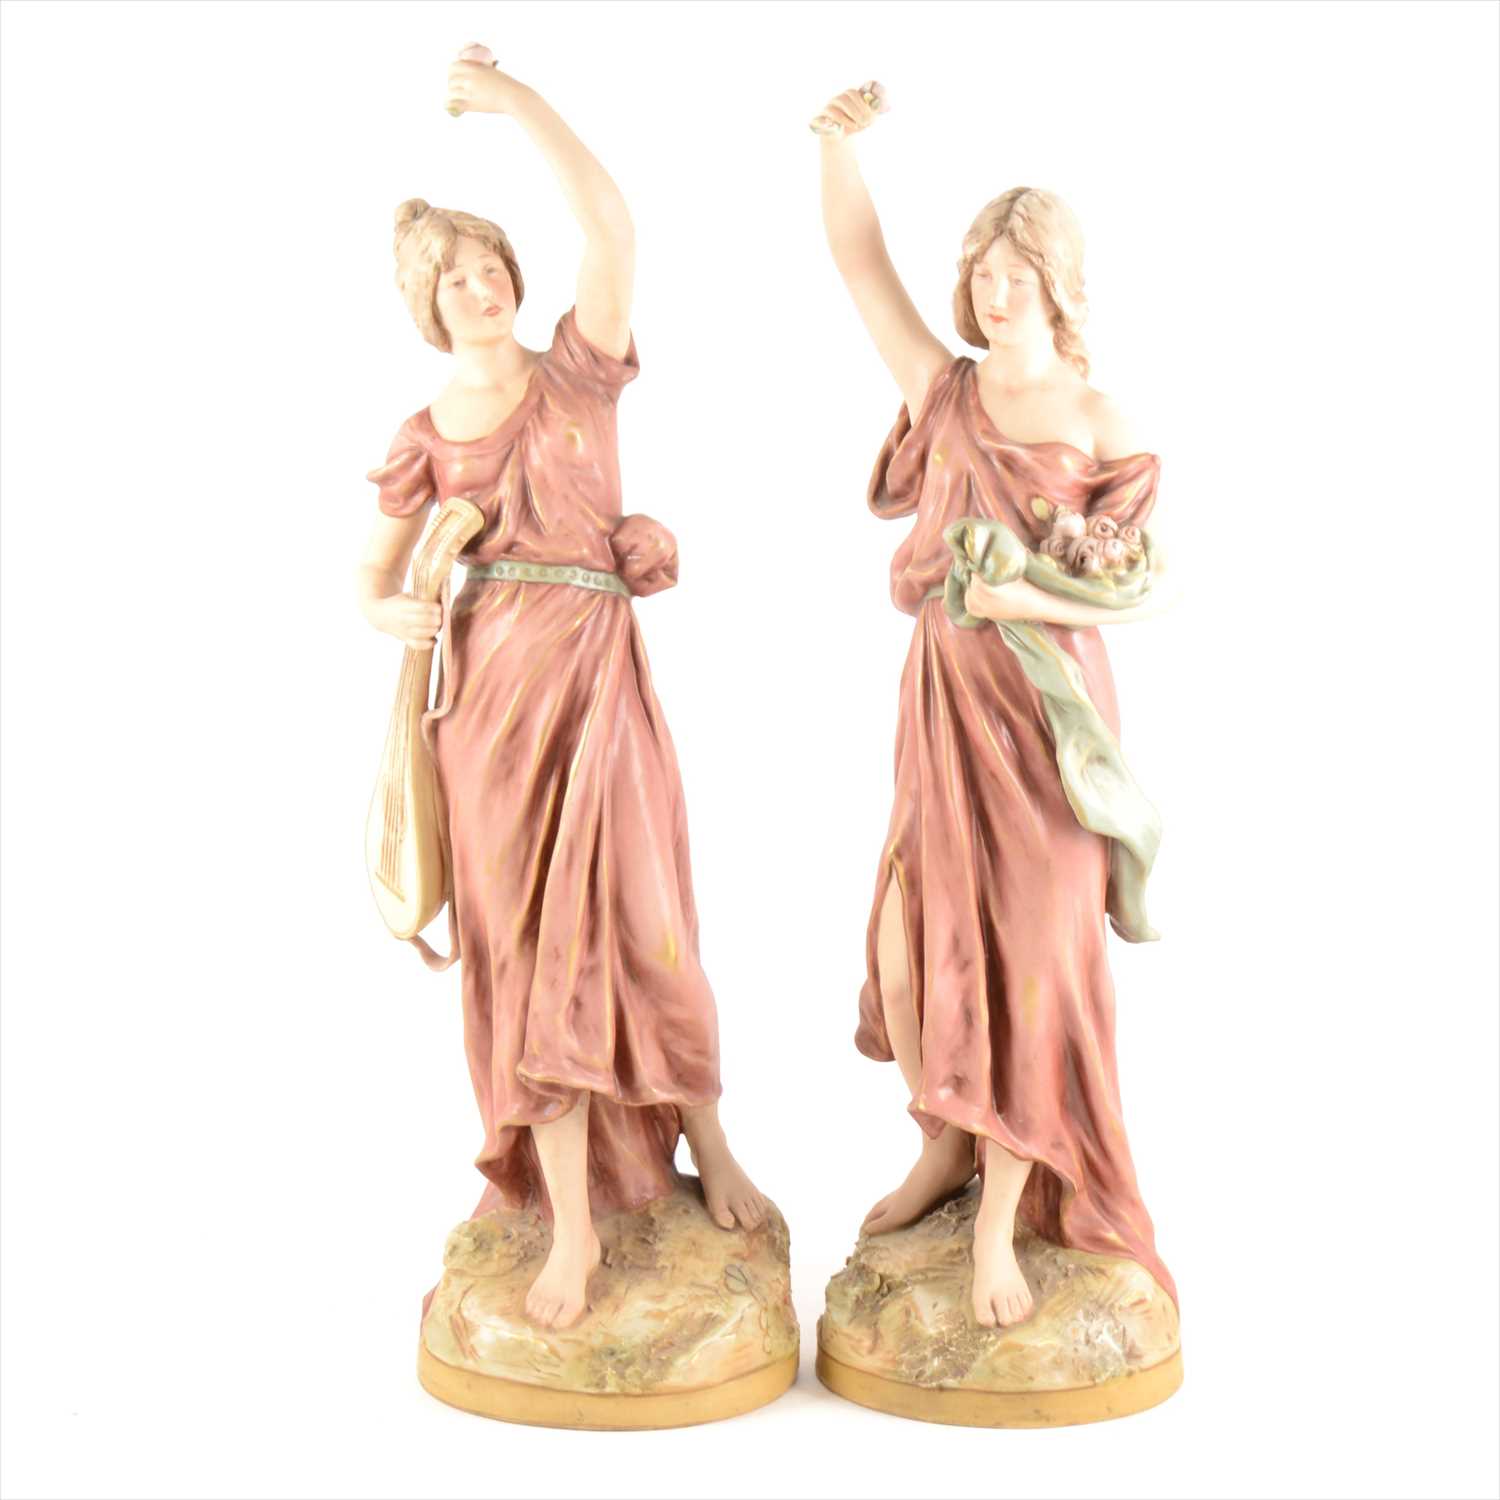 Lot 64 - Pair of Royal Dux figures, Lady with Lute, and Lady with Flowers